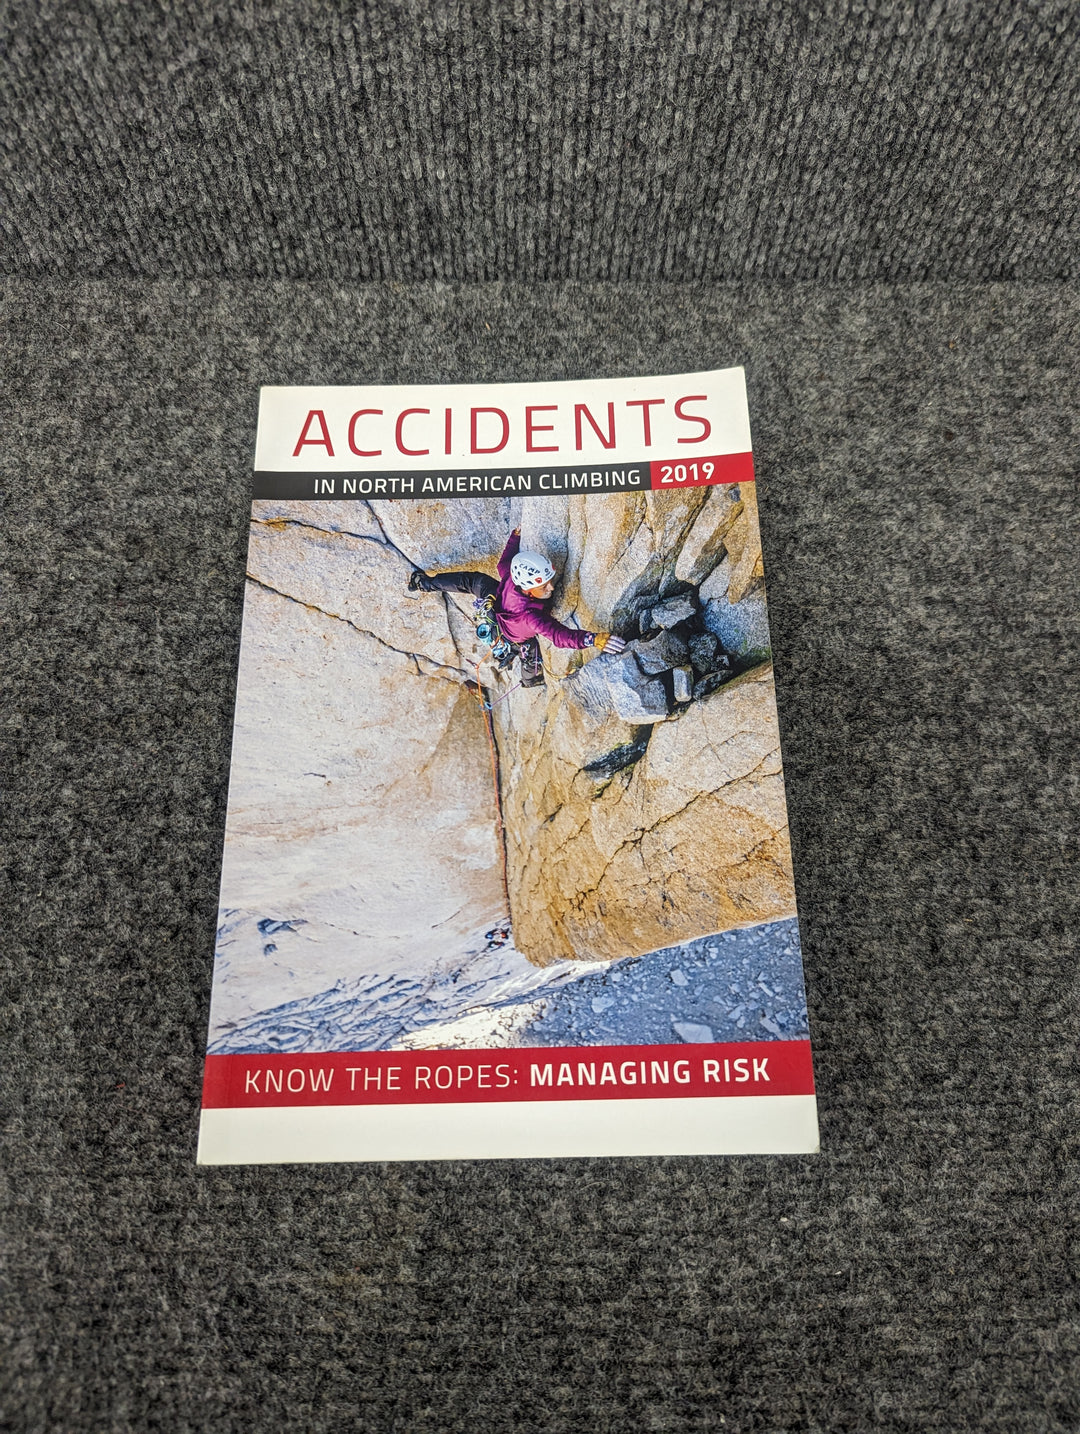 Accidents in North American Climbing 2019